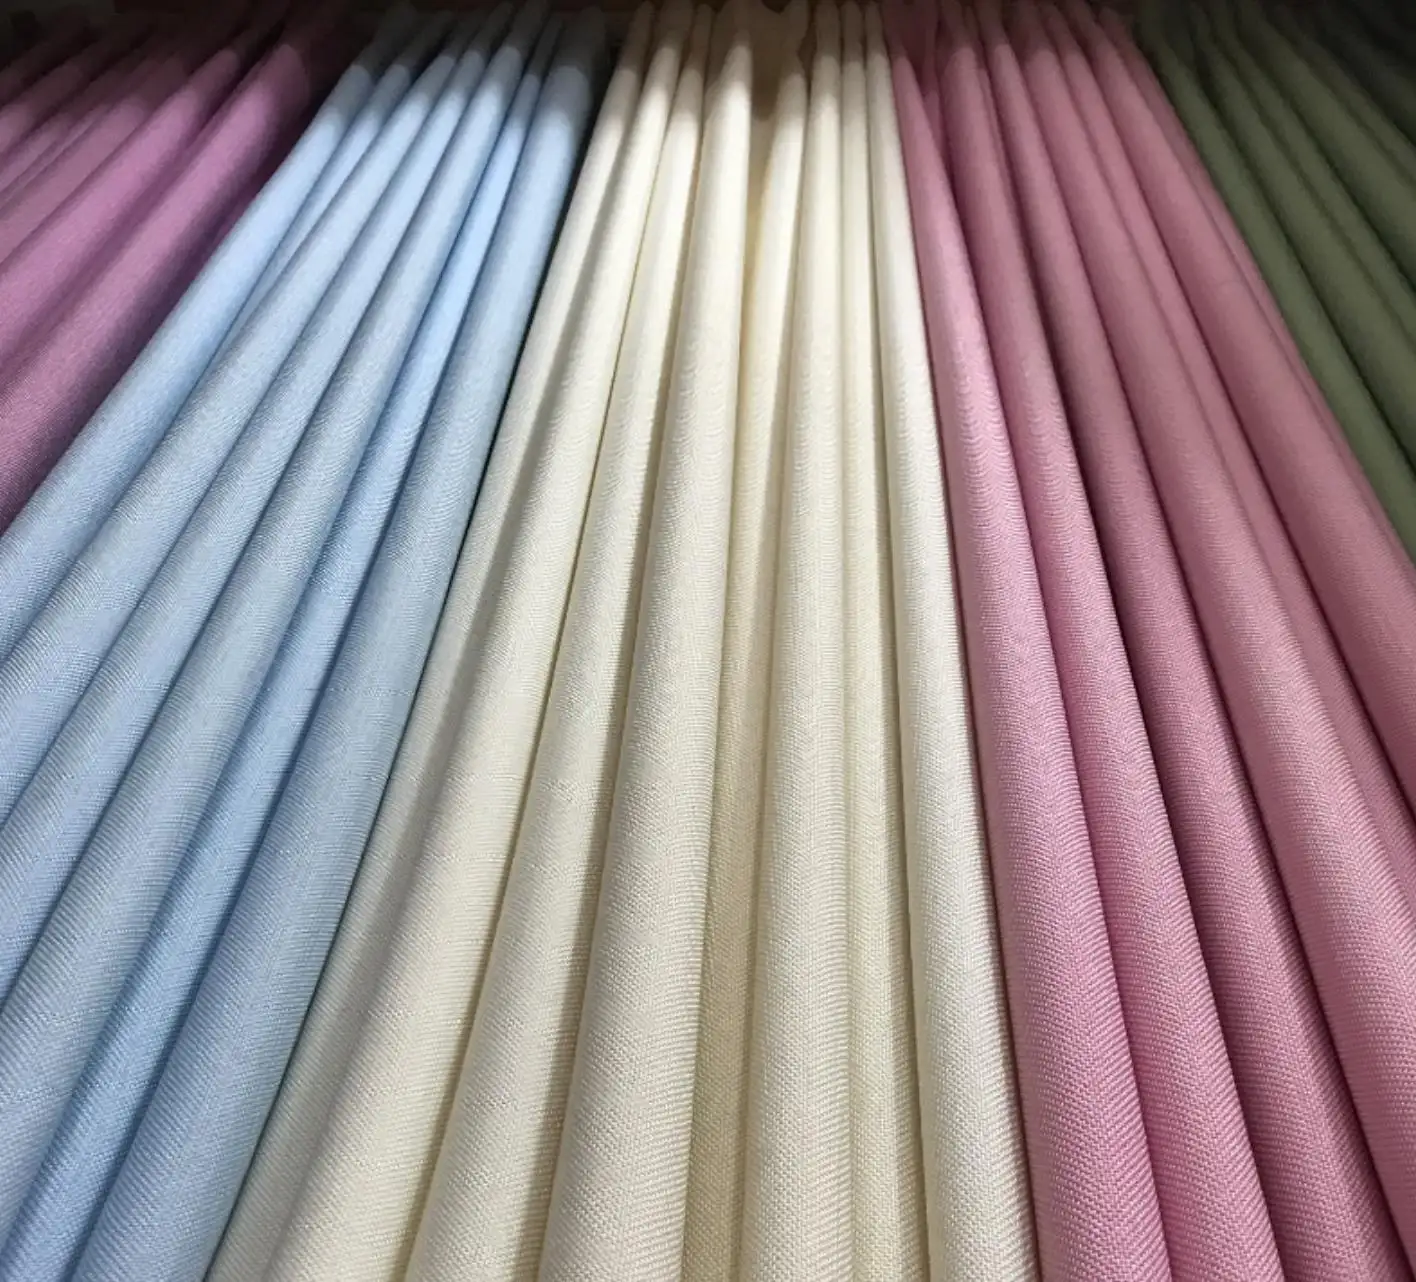 Linen curtain blackout ready made window curtains for hotel simply sells